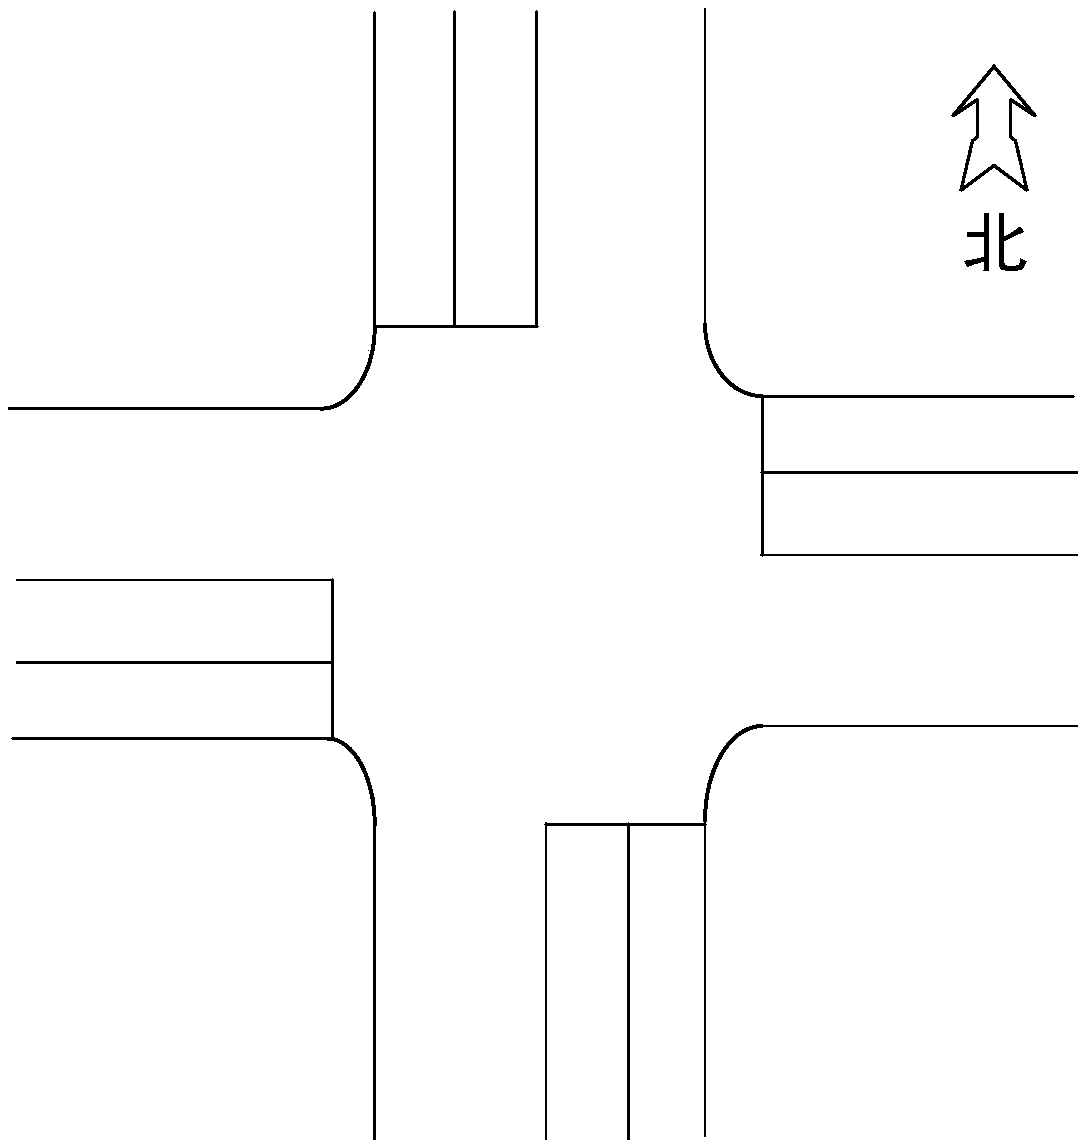 Urban road intersection self-adaption control method and device based on single video